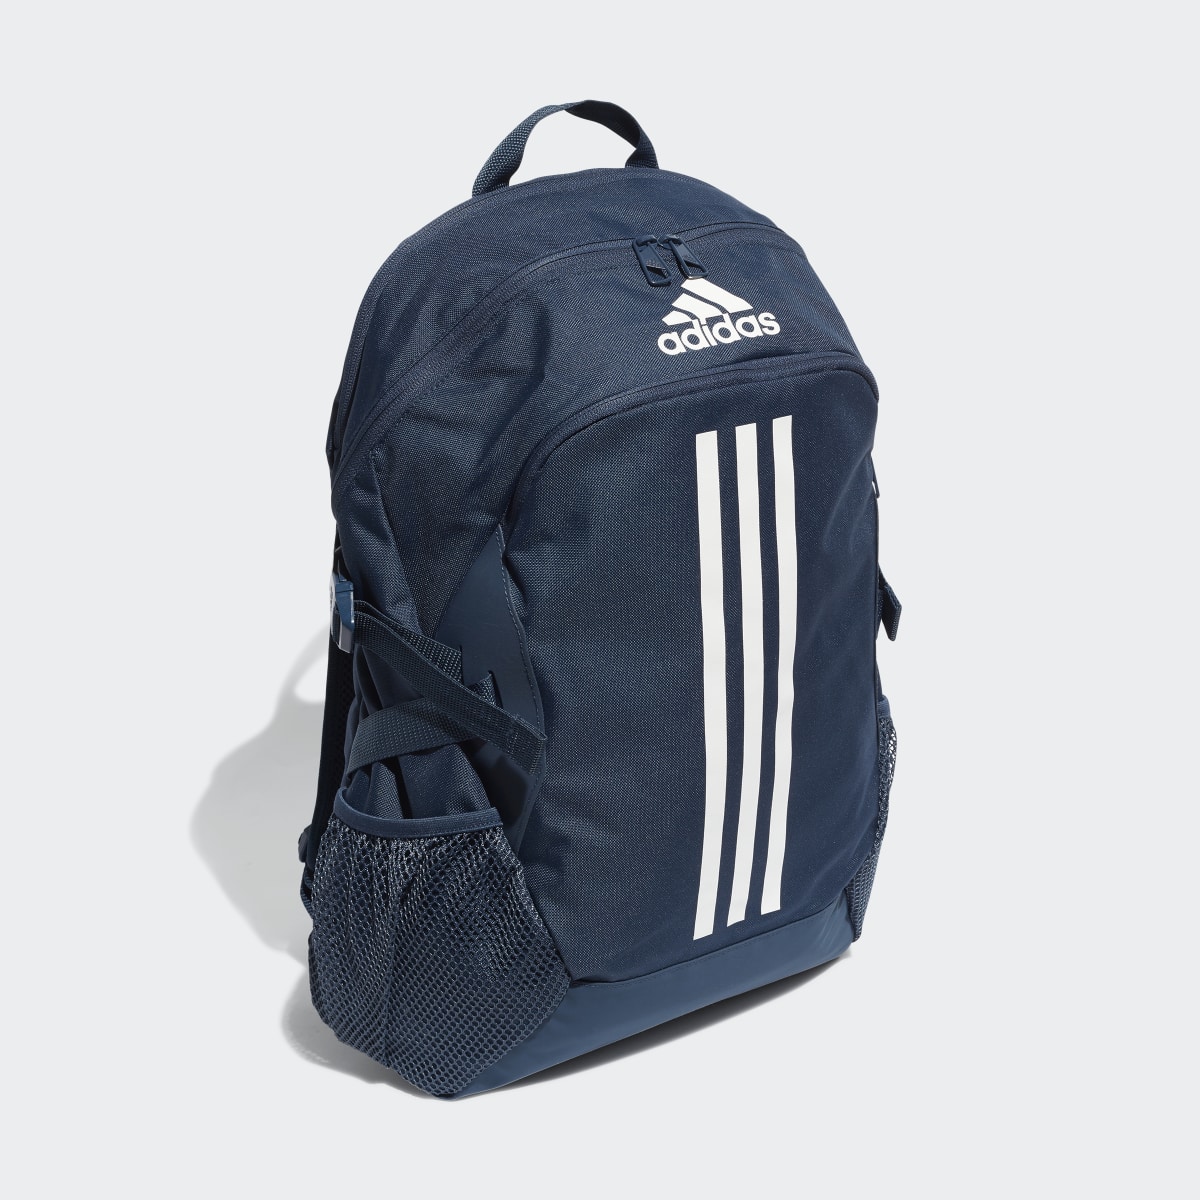 Adidas Power 5 Backpack. 4